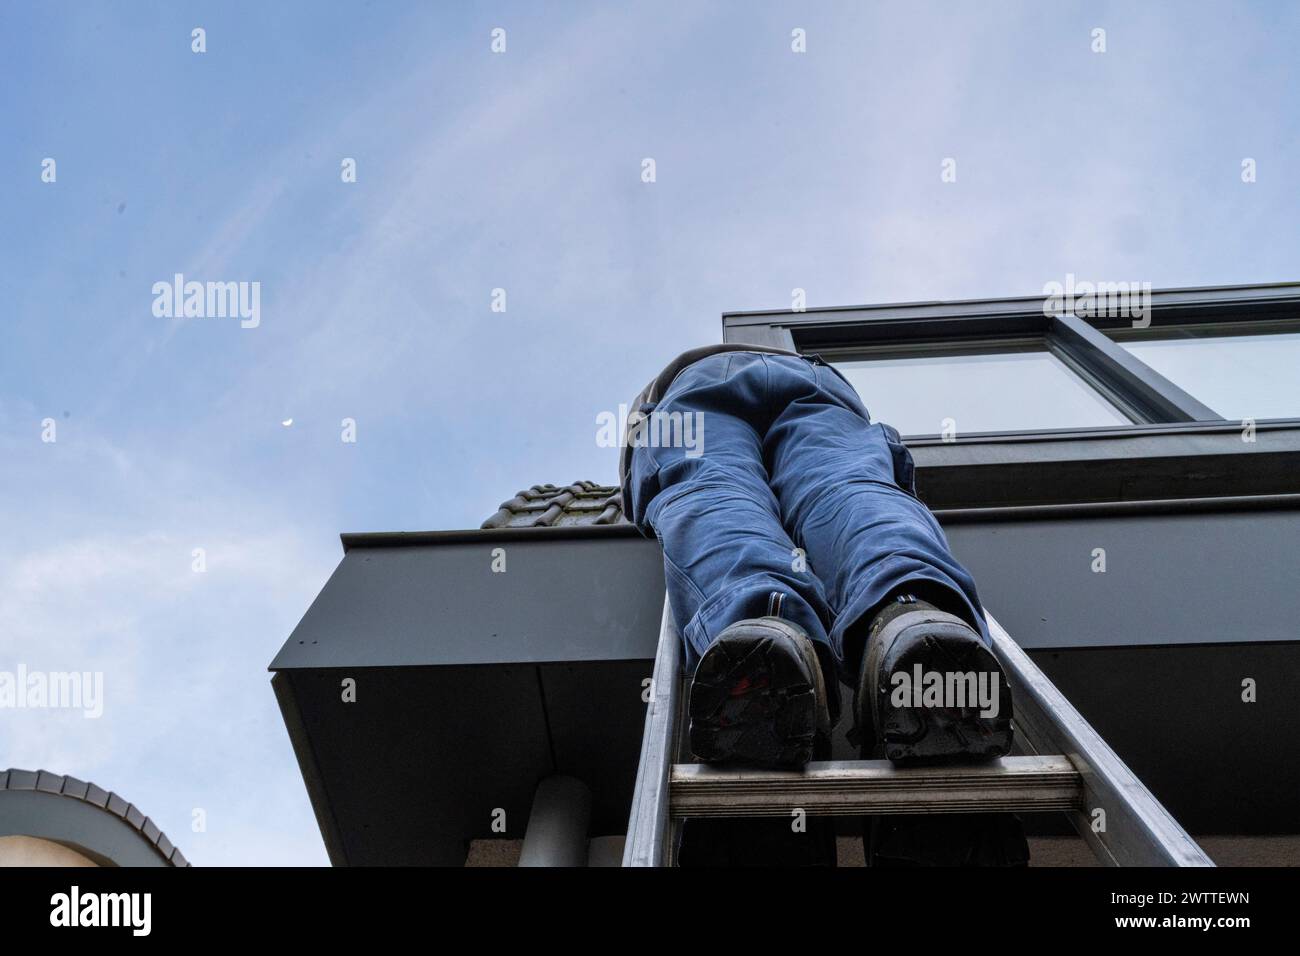 Climbing the corporate ladder, taken from an unconventional angle. Stock Photo